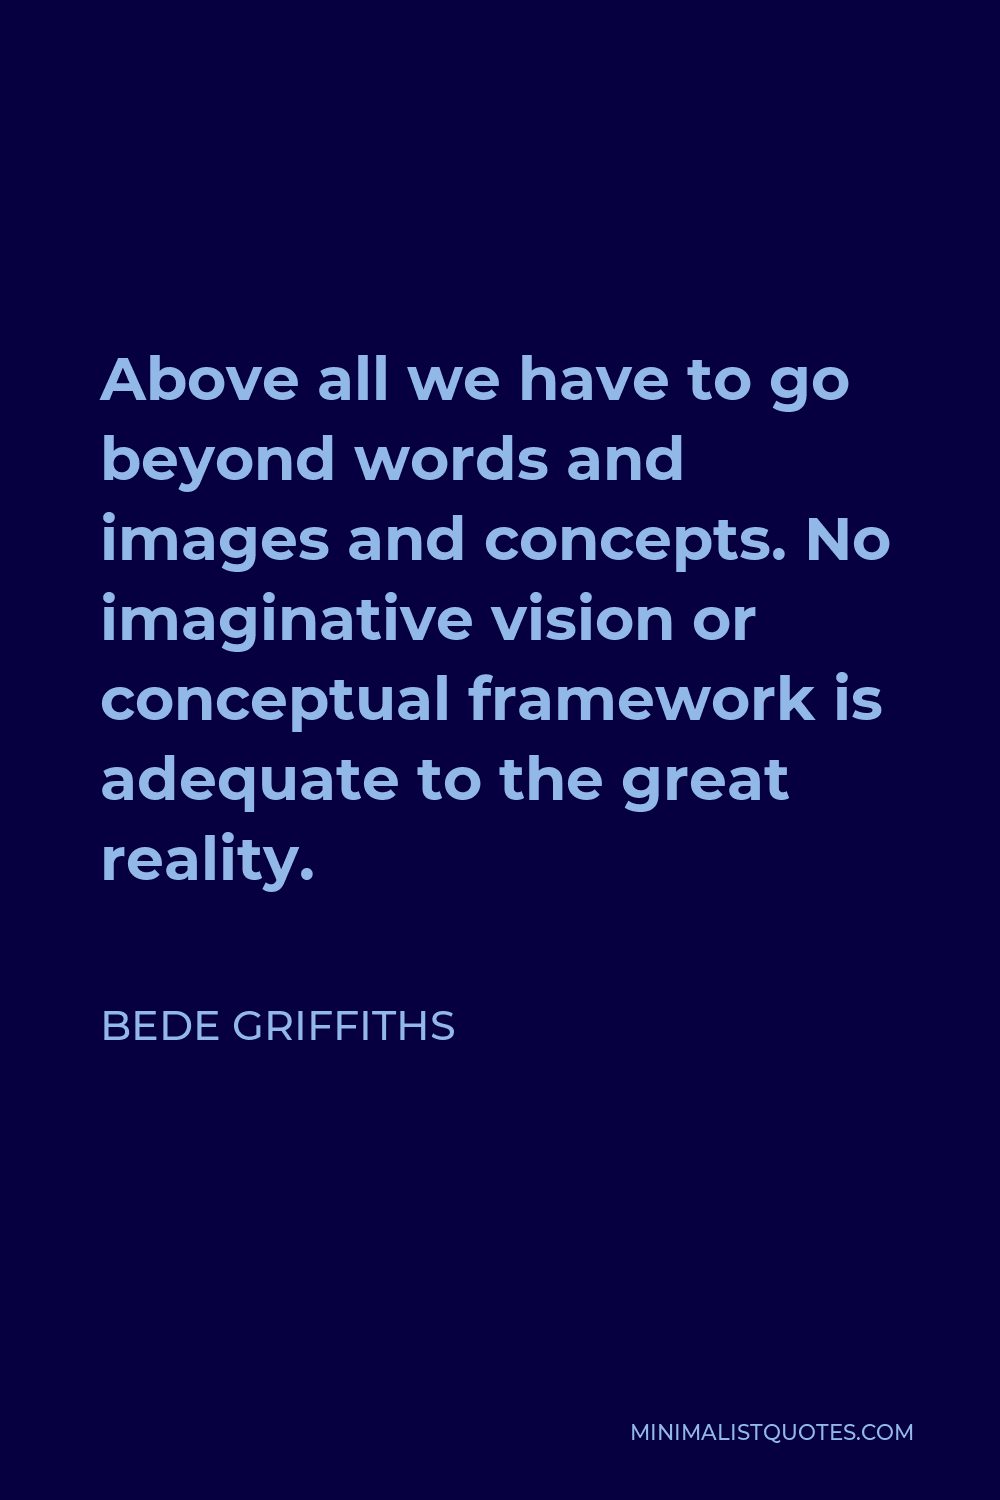 Bede Griffiths Quote - Above all we have to go beyond words and images and concepts. No imaginative vision or conceptual framework is adequate to the great reality.